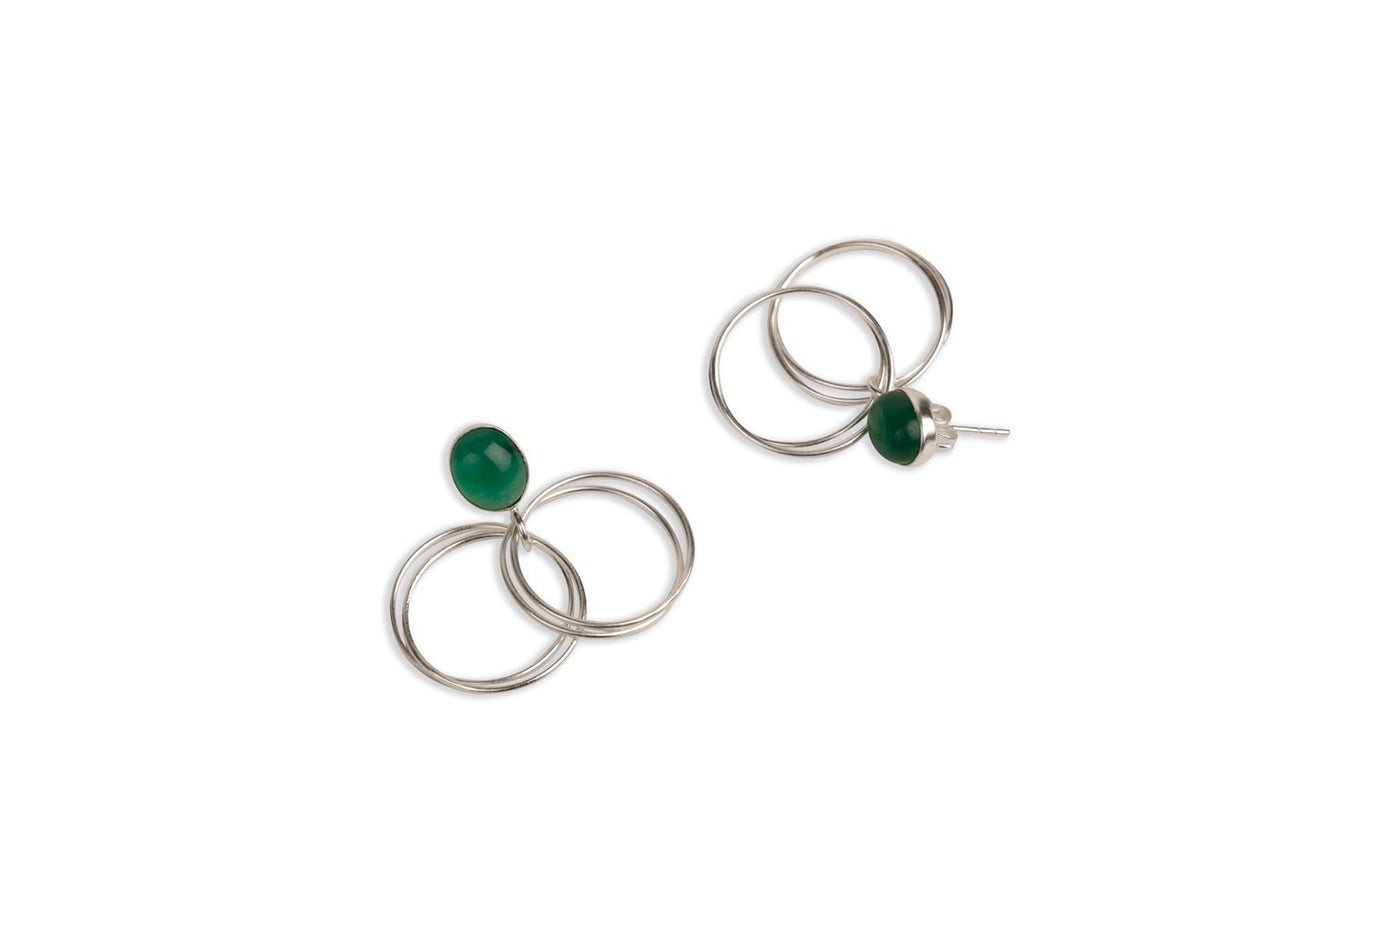 Alluring Green Onyx Silver Earrings with Rings - Stilskii